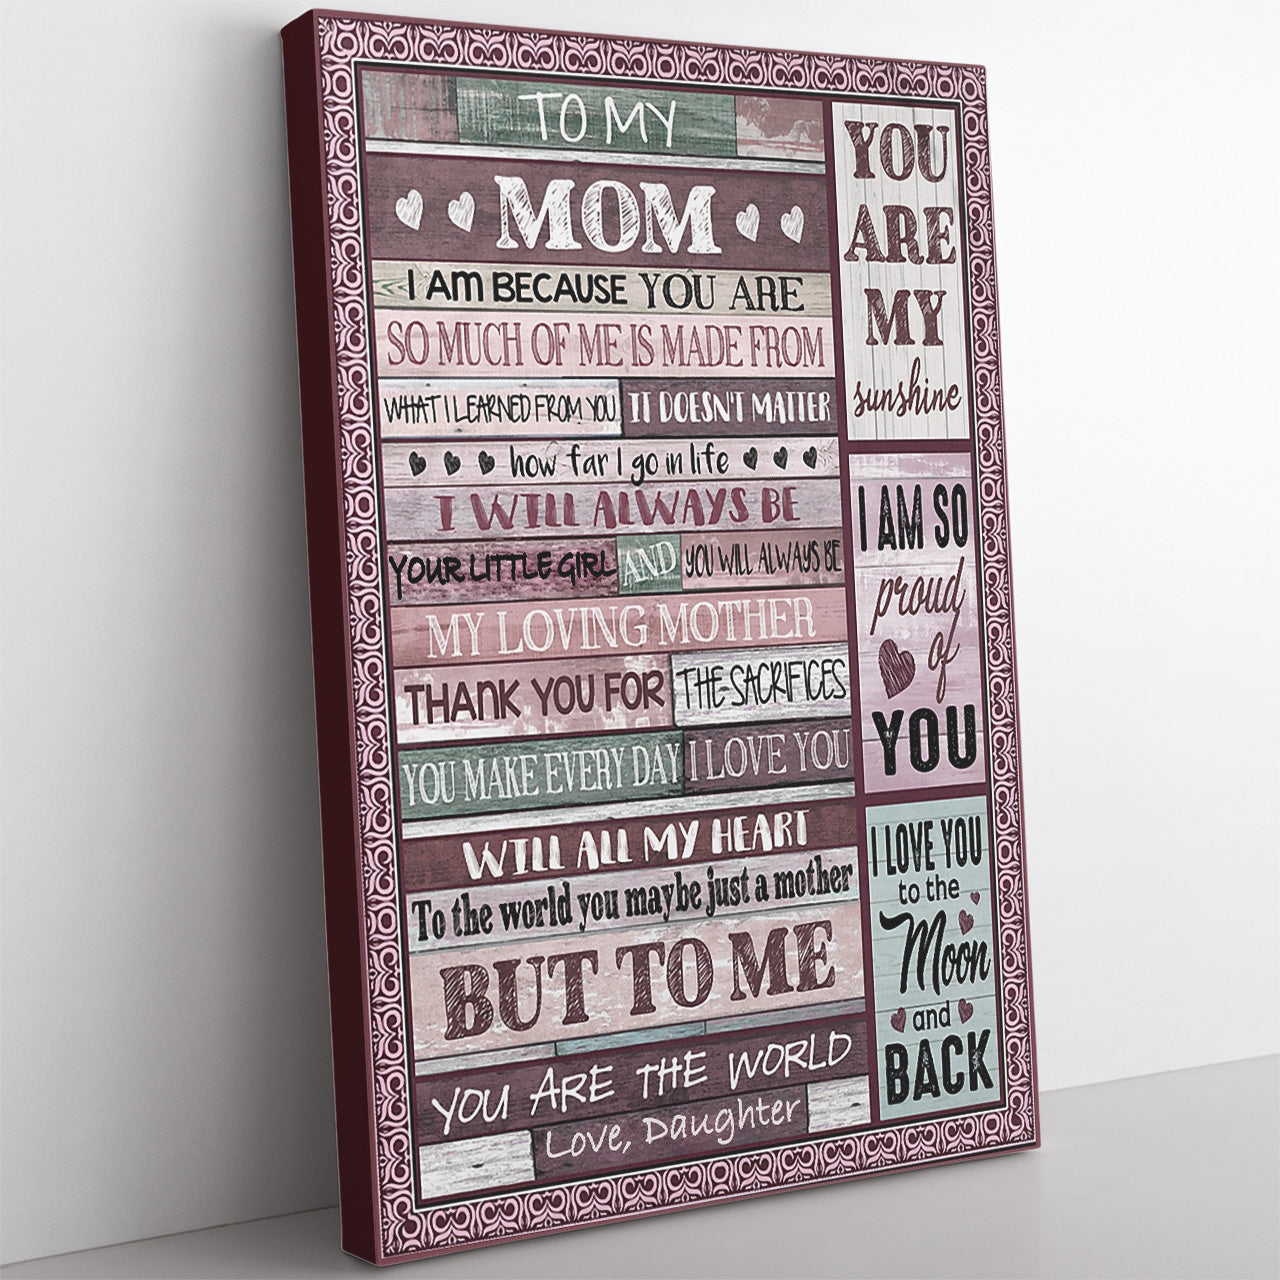 Personalized Canvas Gift For Mom, I Am Because You Are So Much of Me Made From Canvas